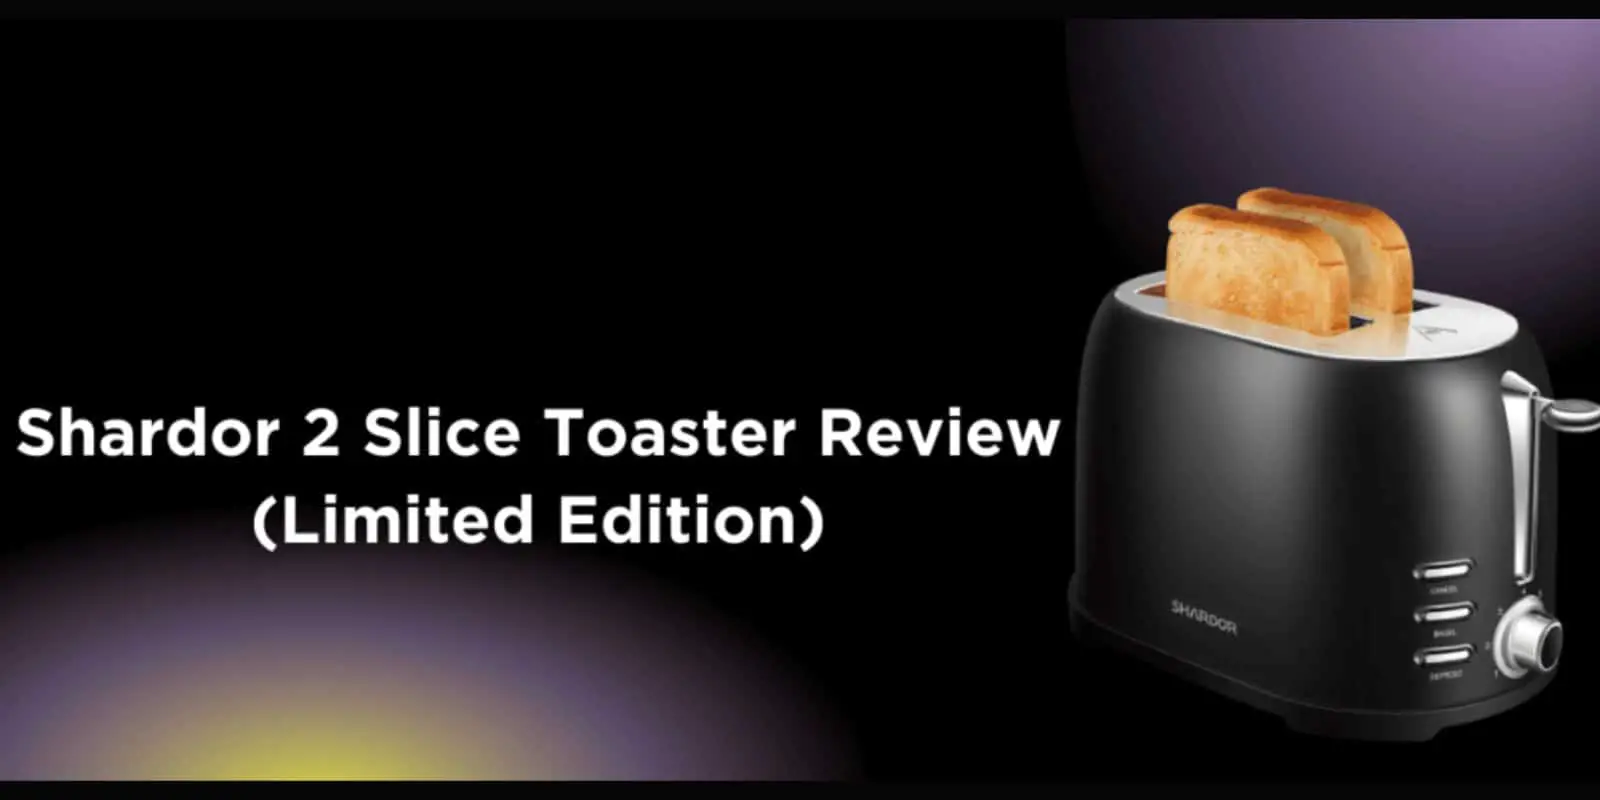 Shardor 2 Slice Toaster Review (Limited Edition) | Features, Advantages, Pros & Cons